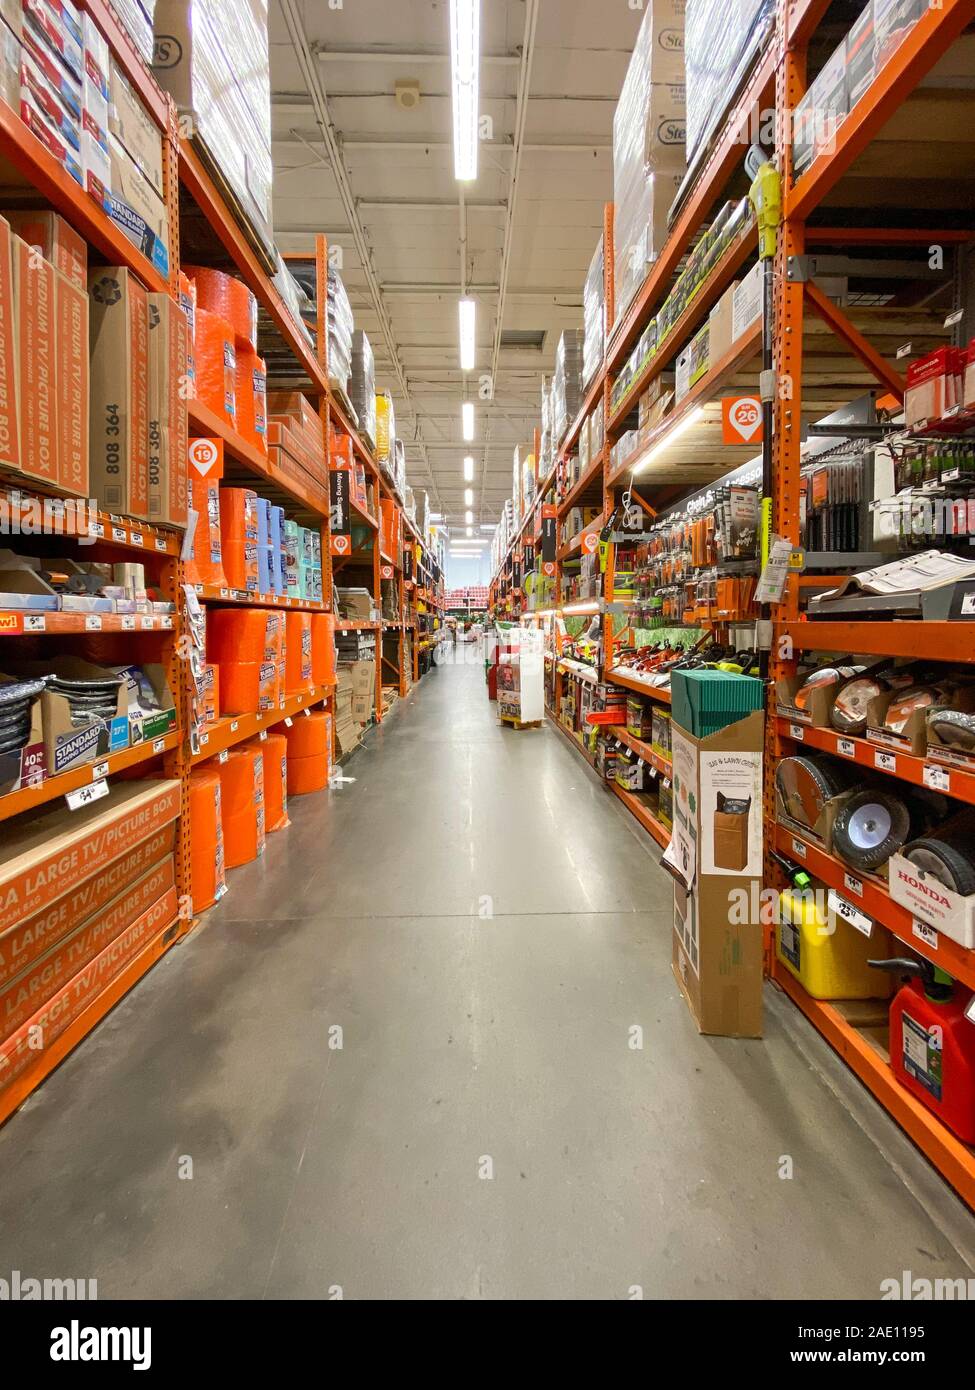 Aisle at The Home Depot hardware store. The Home Depot is the largest american home improvement retailer, San Diego, USA, December 05th, 2019 Stock Photo